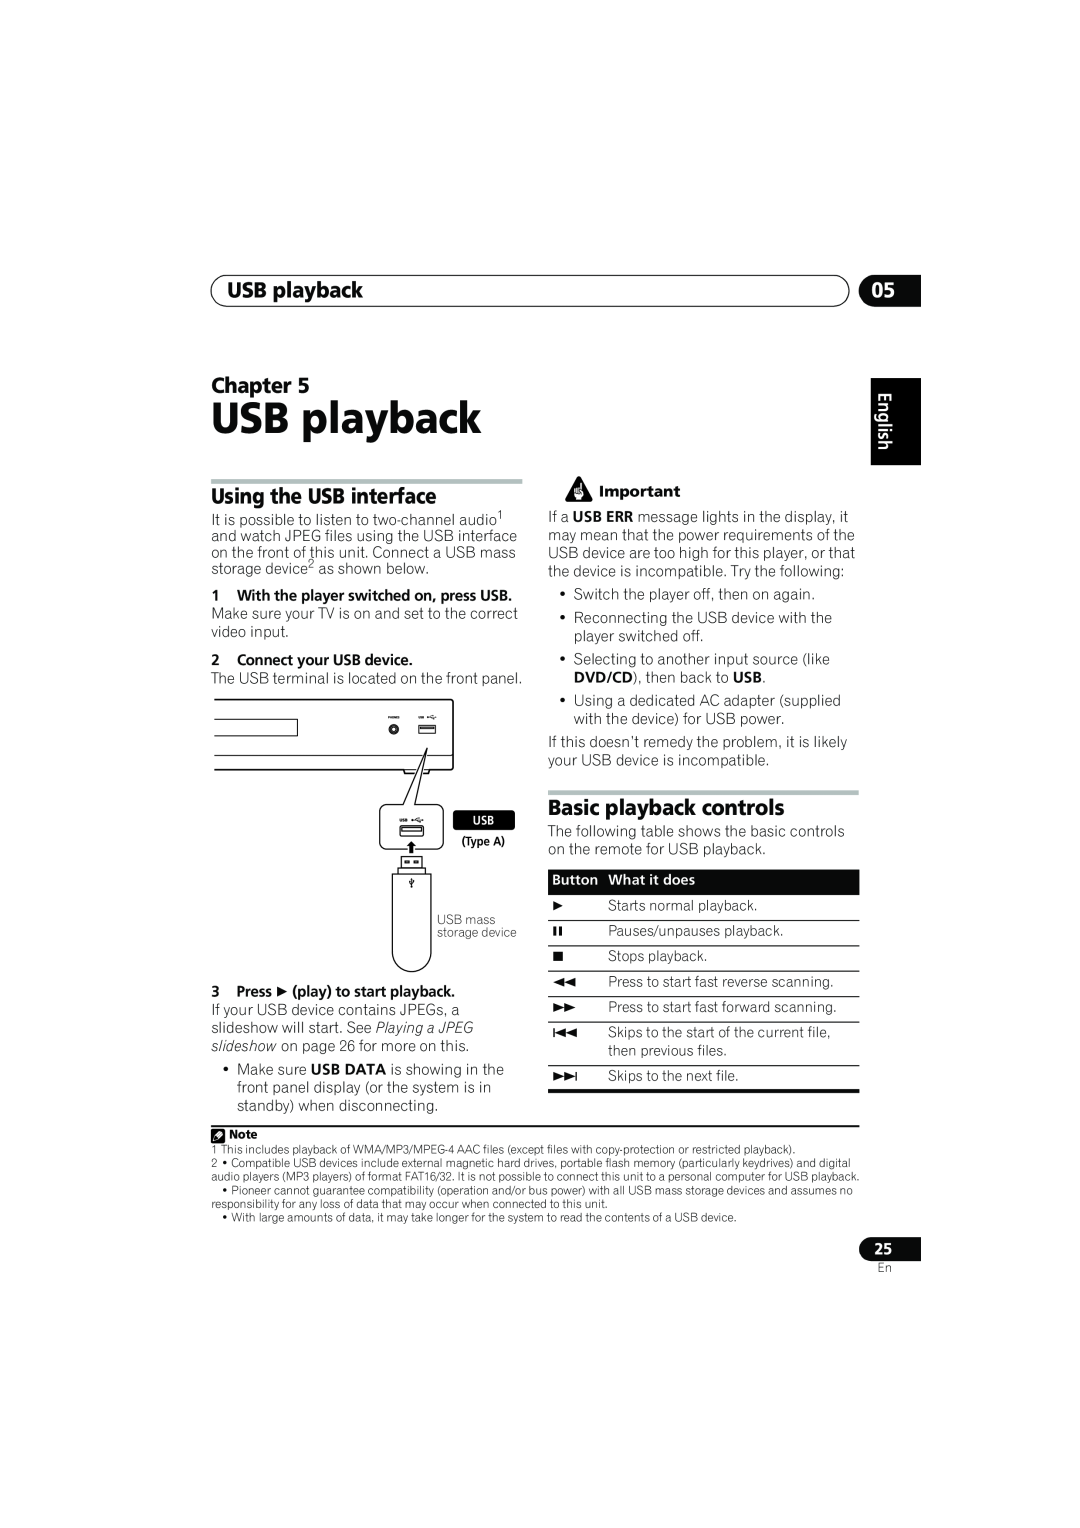 Pioneer XV-DV373 USB playback Chapter, Using the USB interface, Basic playback controls, 2Connect your USB device 